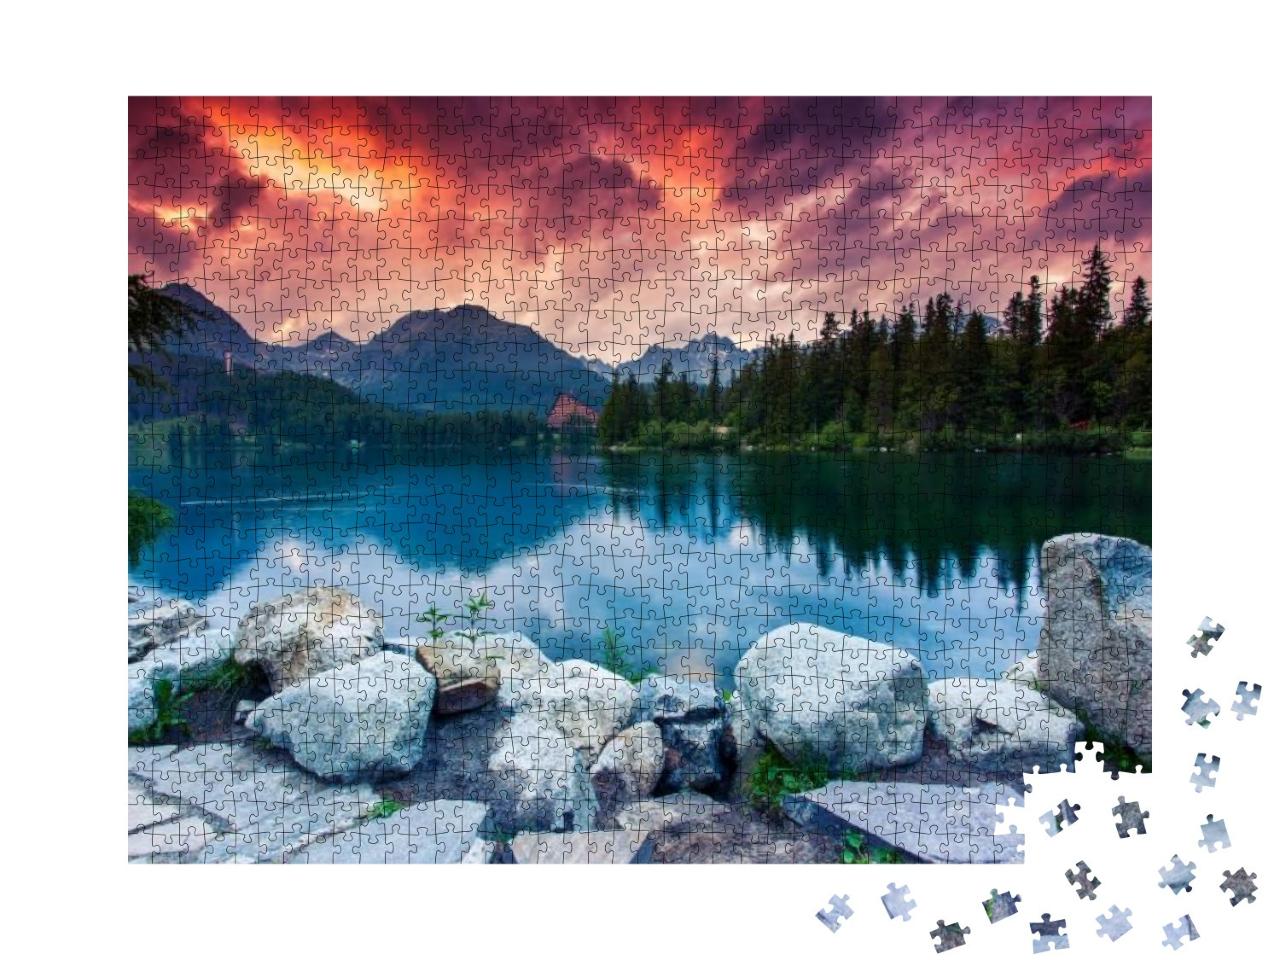 Mountain Lake in National Park High Tatra. Dramatic Overc... Jigsaw Puzzle with 1000 pieces